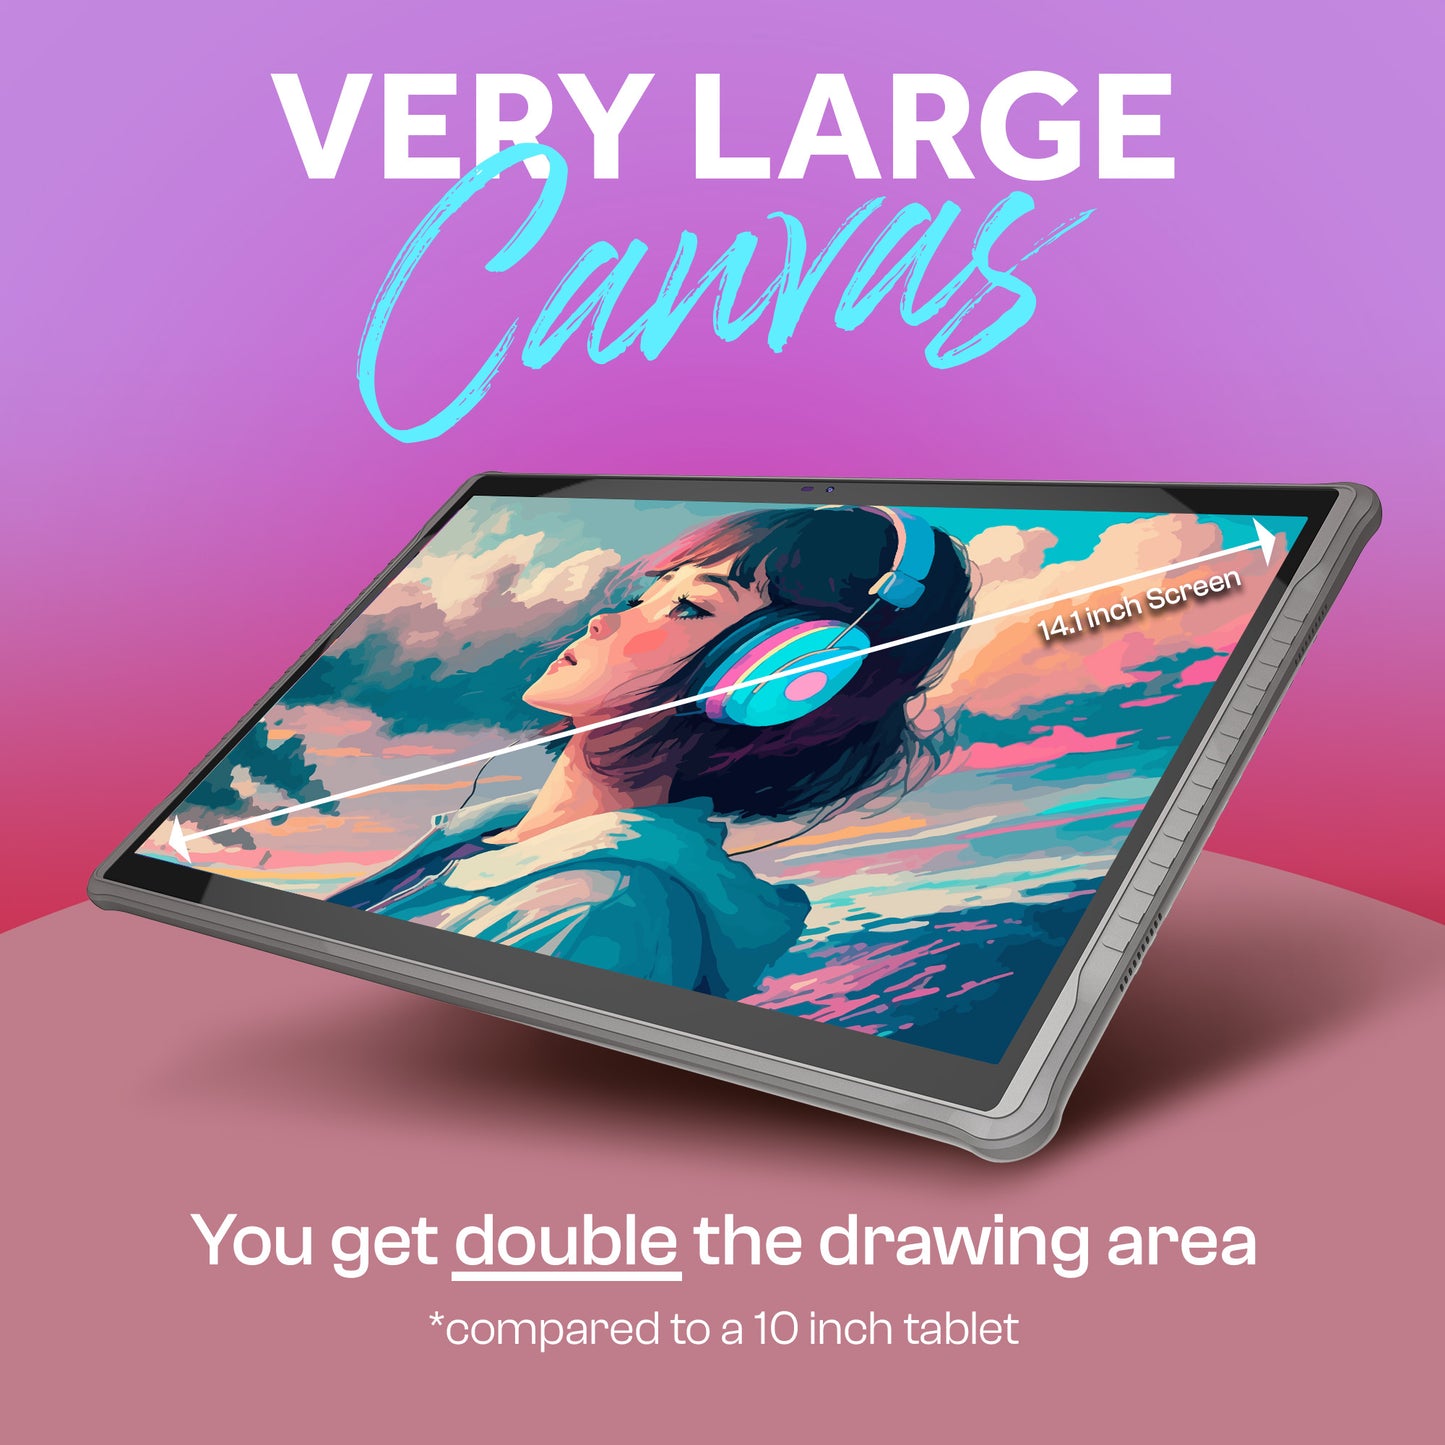 Very Large Screen graphic drawing tablet